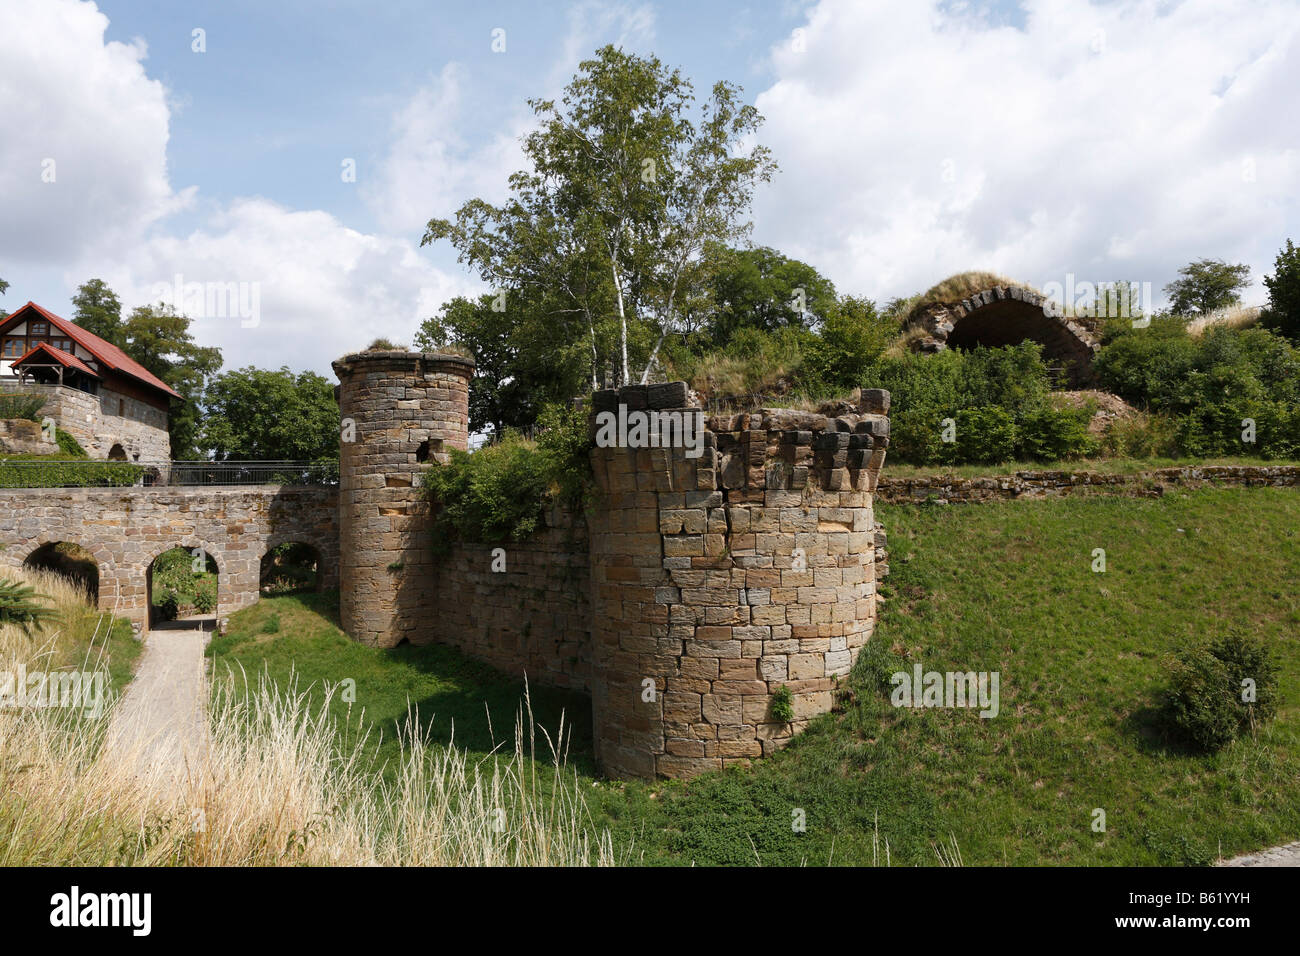 Ruins of the Altenstein Castle, Hassberge, Lower Franconia, Bavaria, Germany, Europe Stock Photo